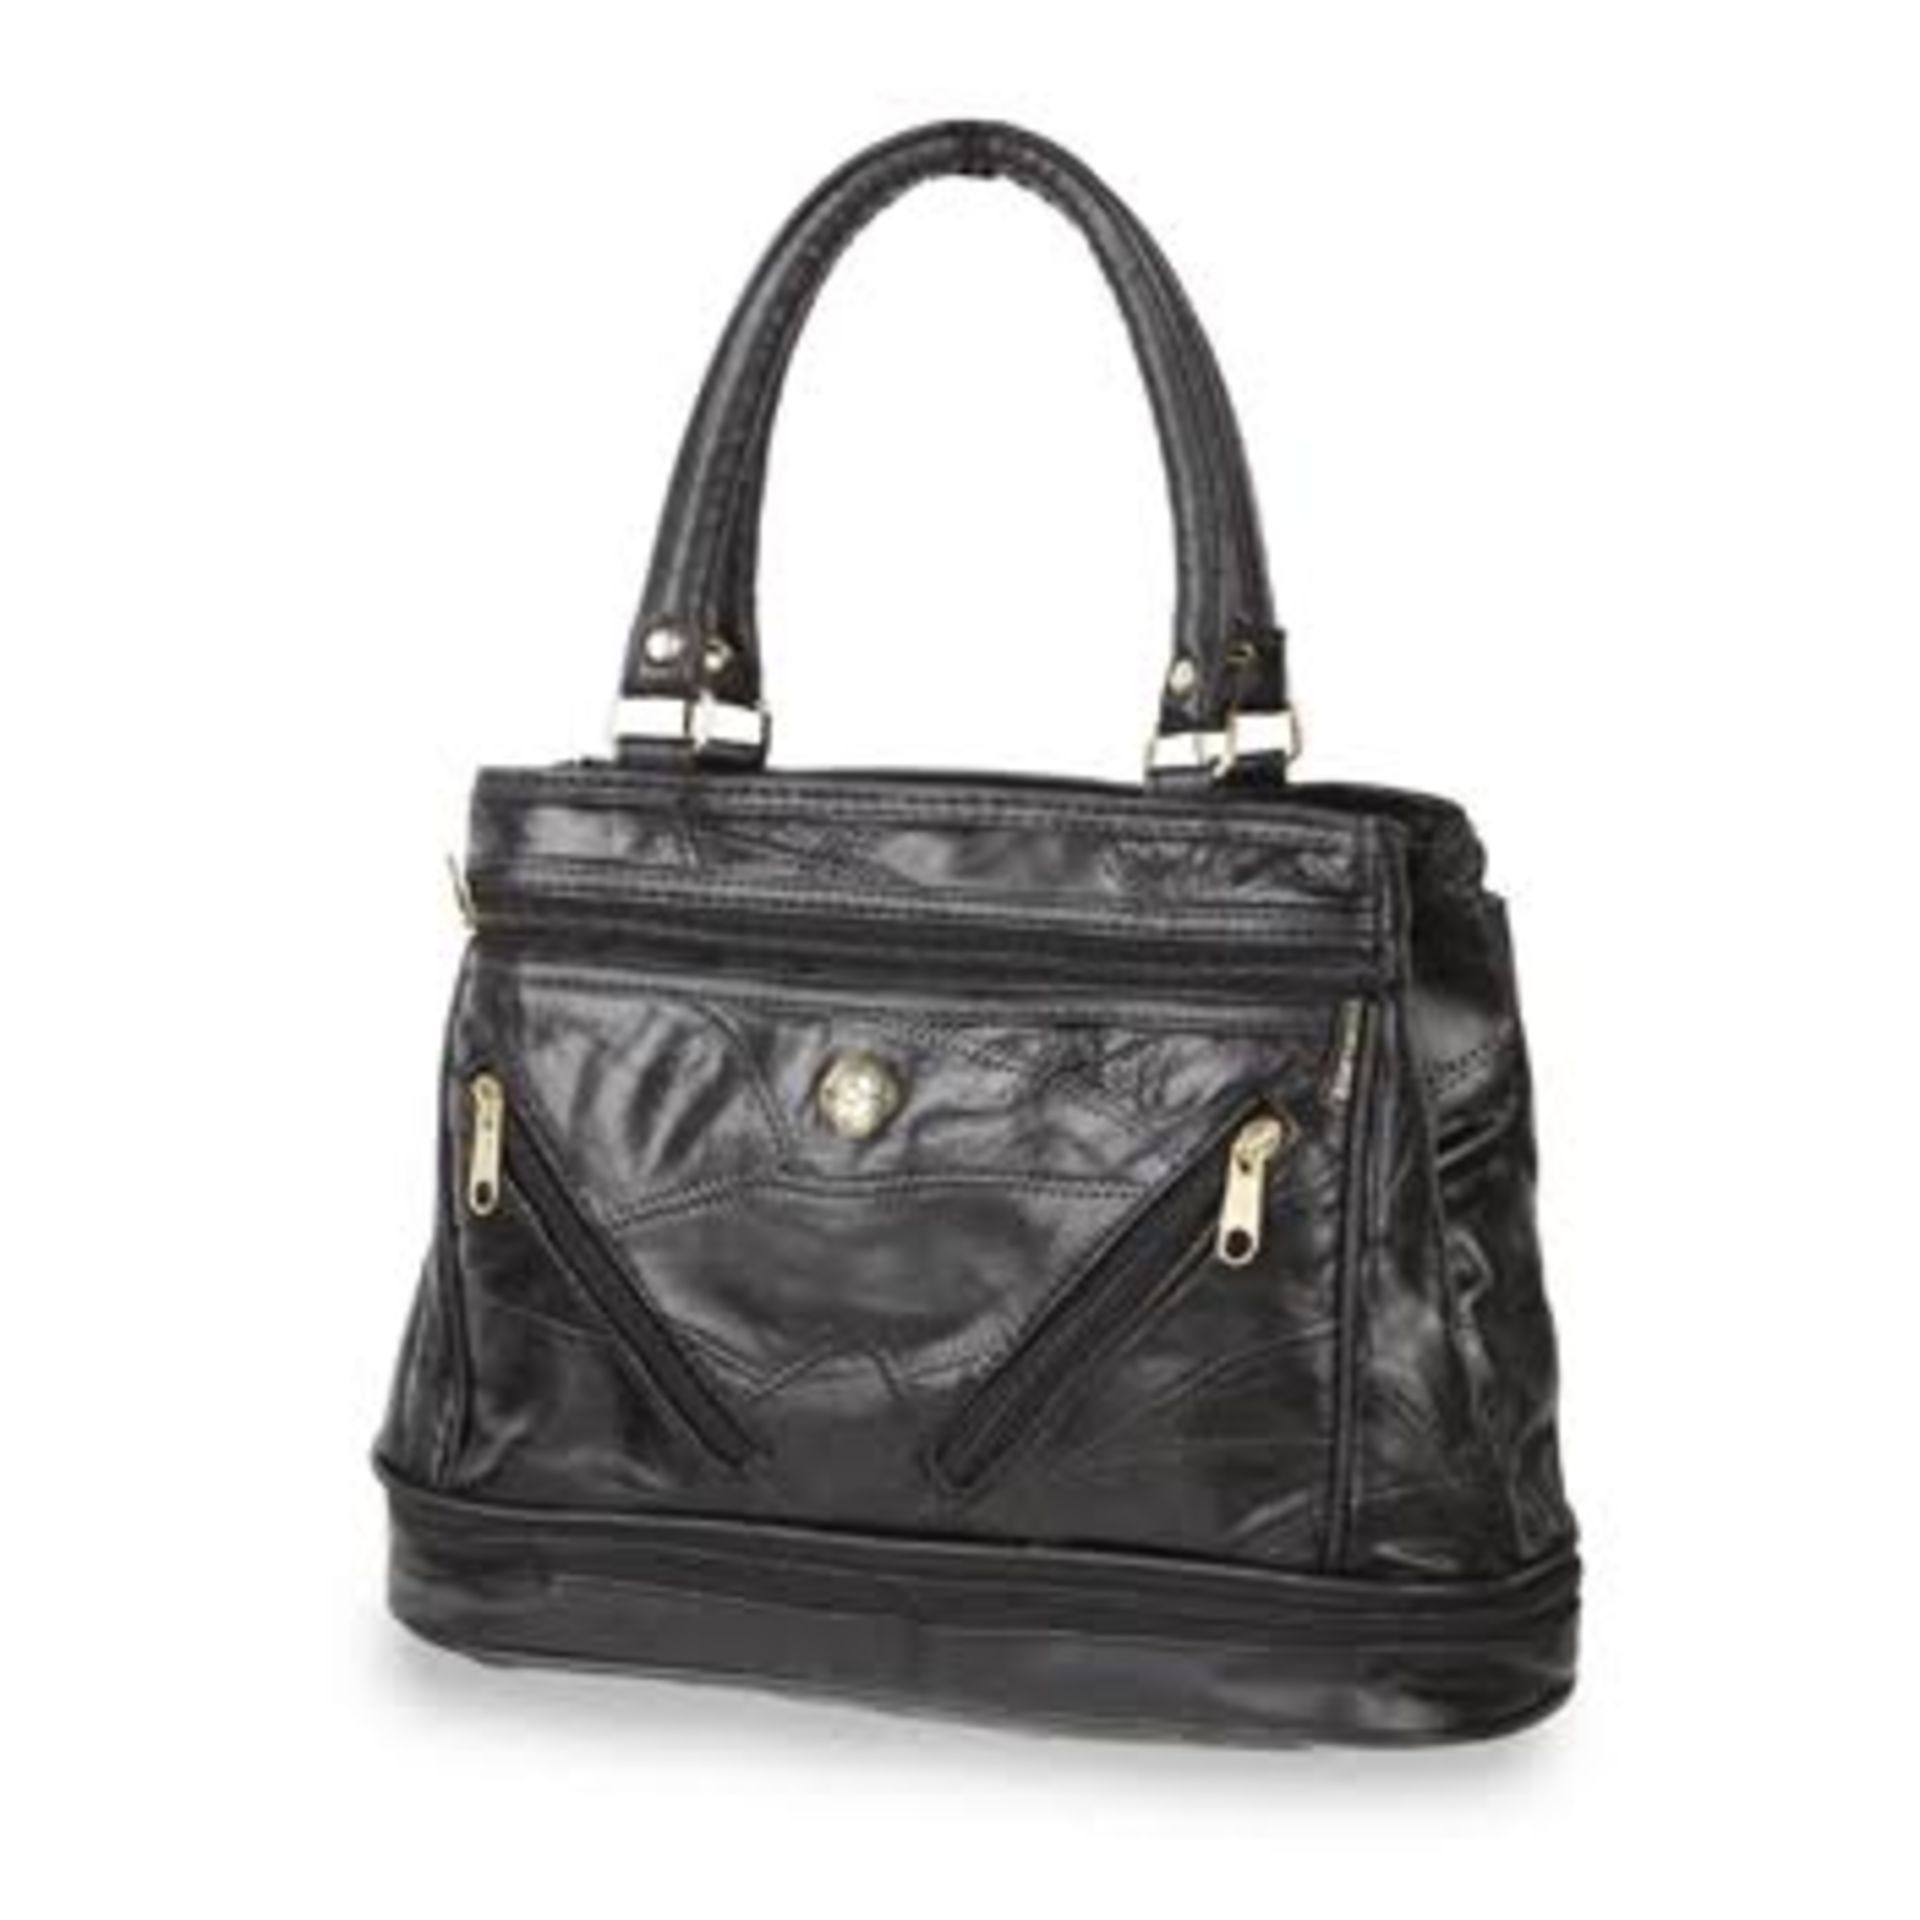 V Brand New Leather Ladies Black Handbag X 2 YOUR BID PRICE TO BE MULTIPLIED BY TWO